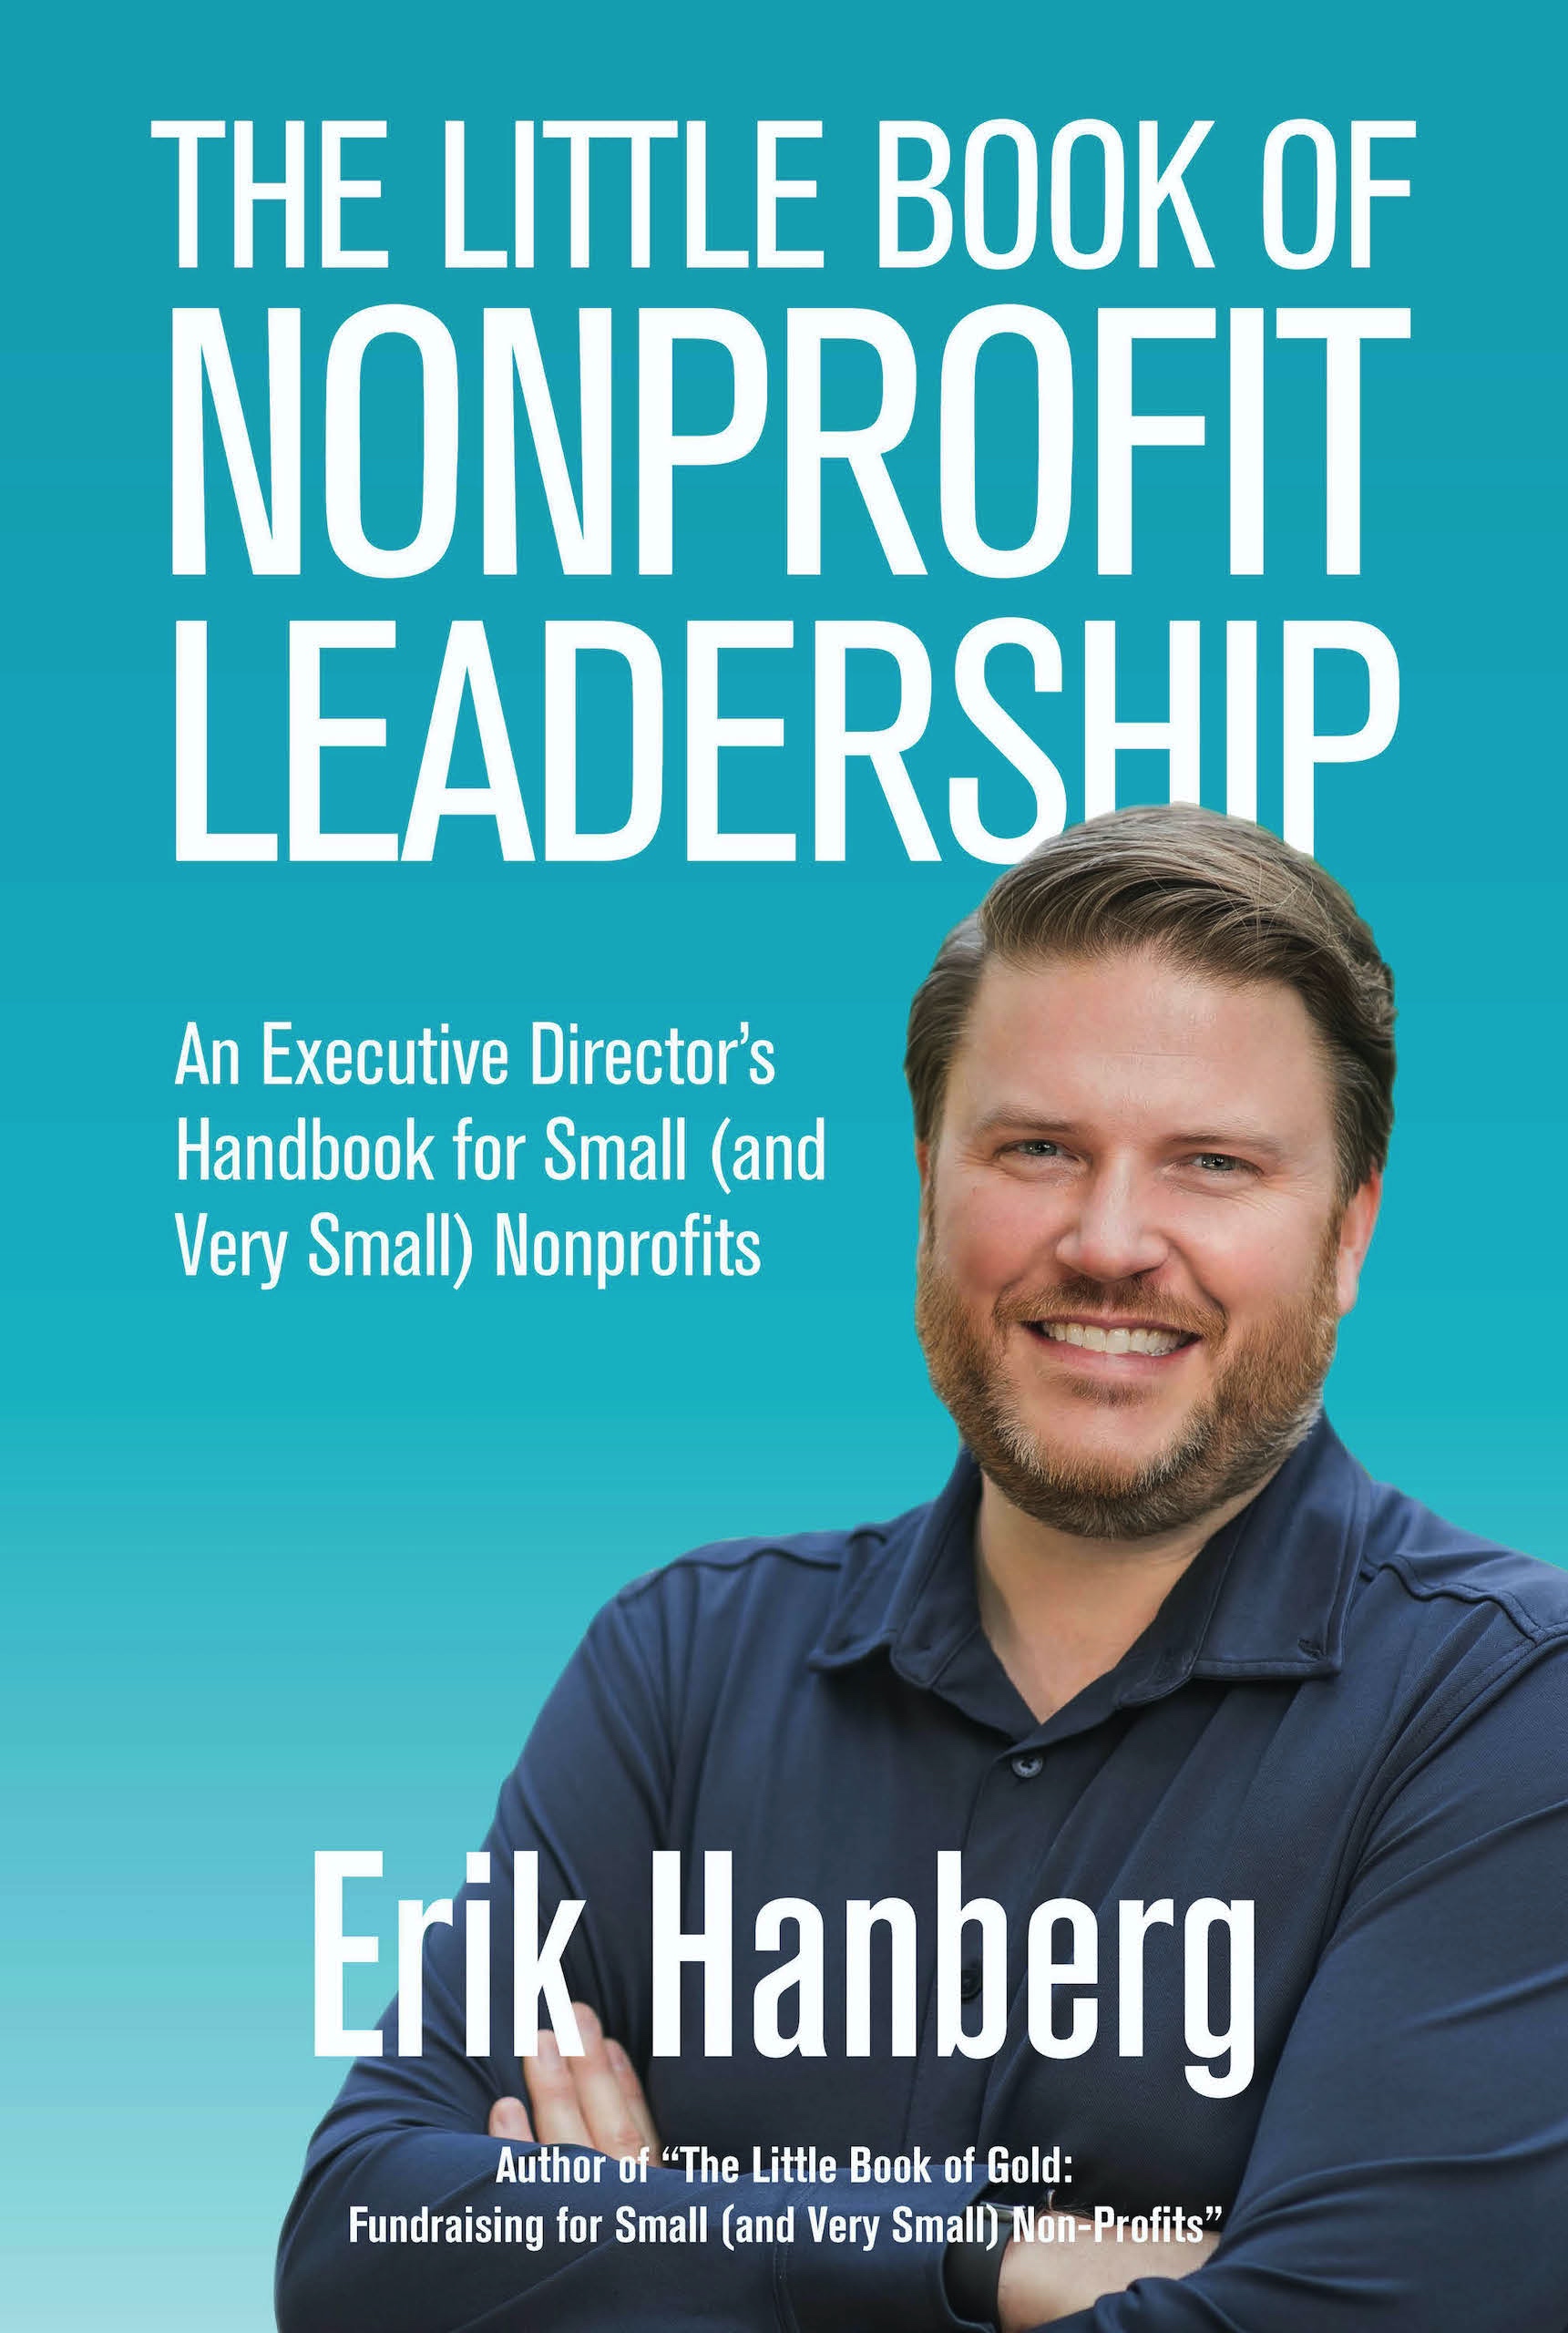 The Little Book of Nonprofit Leadership